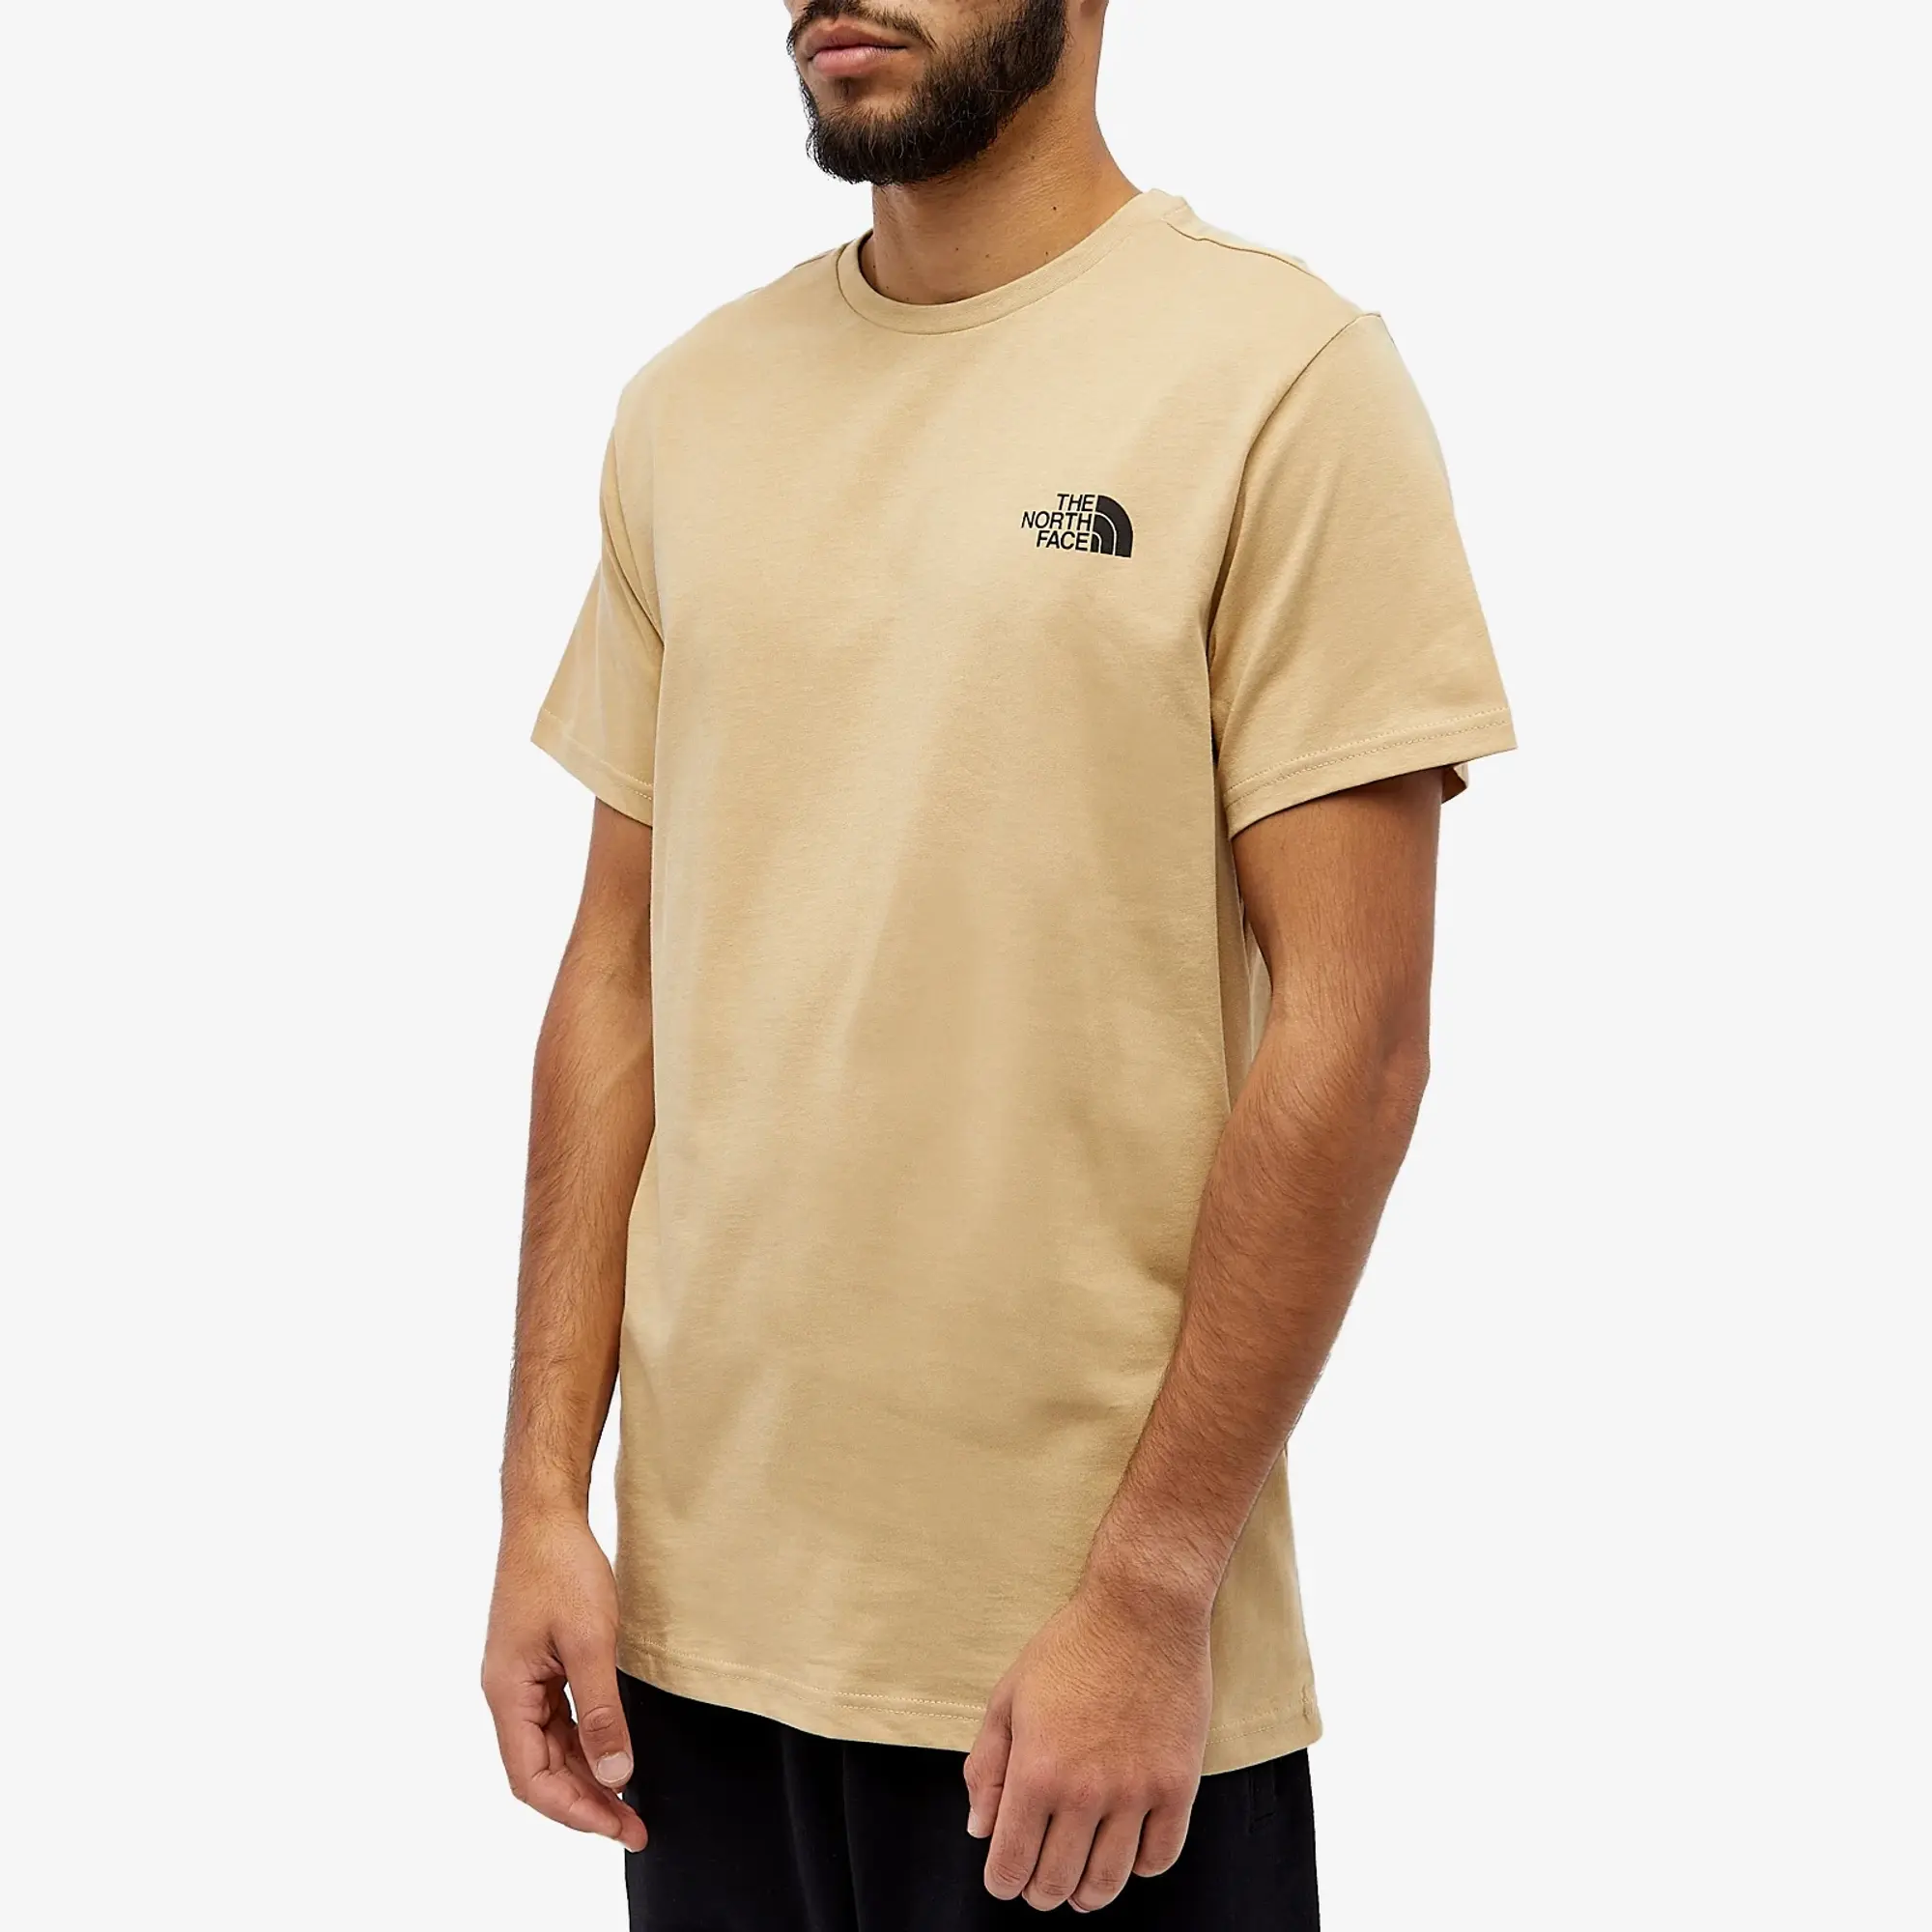 THE NORTH FACE Men's Simple Dome T-Shirt - Grey, Brown